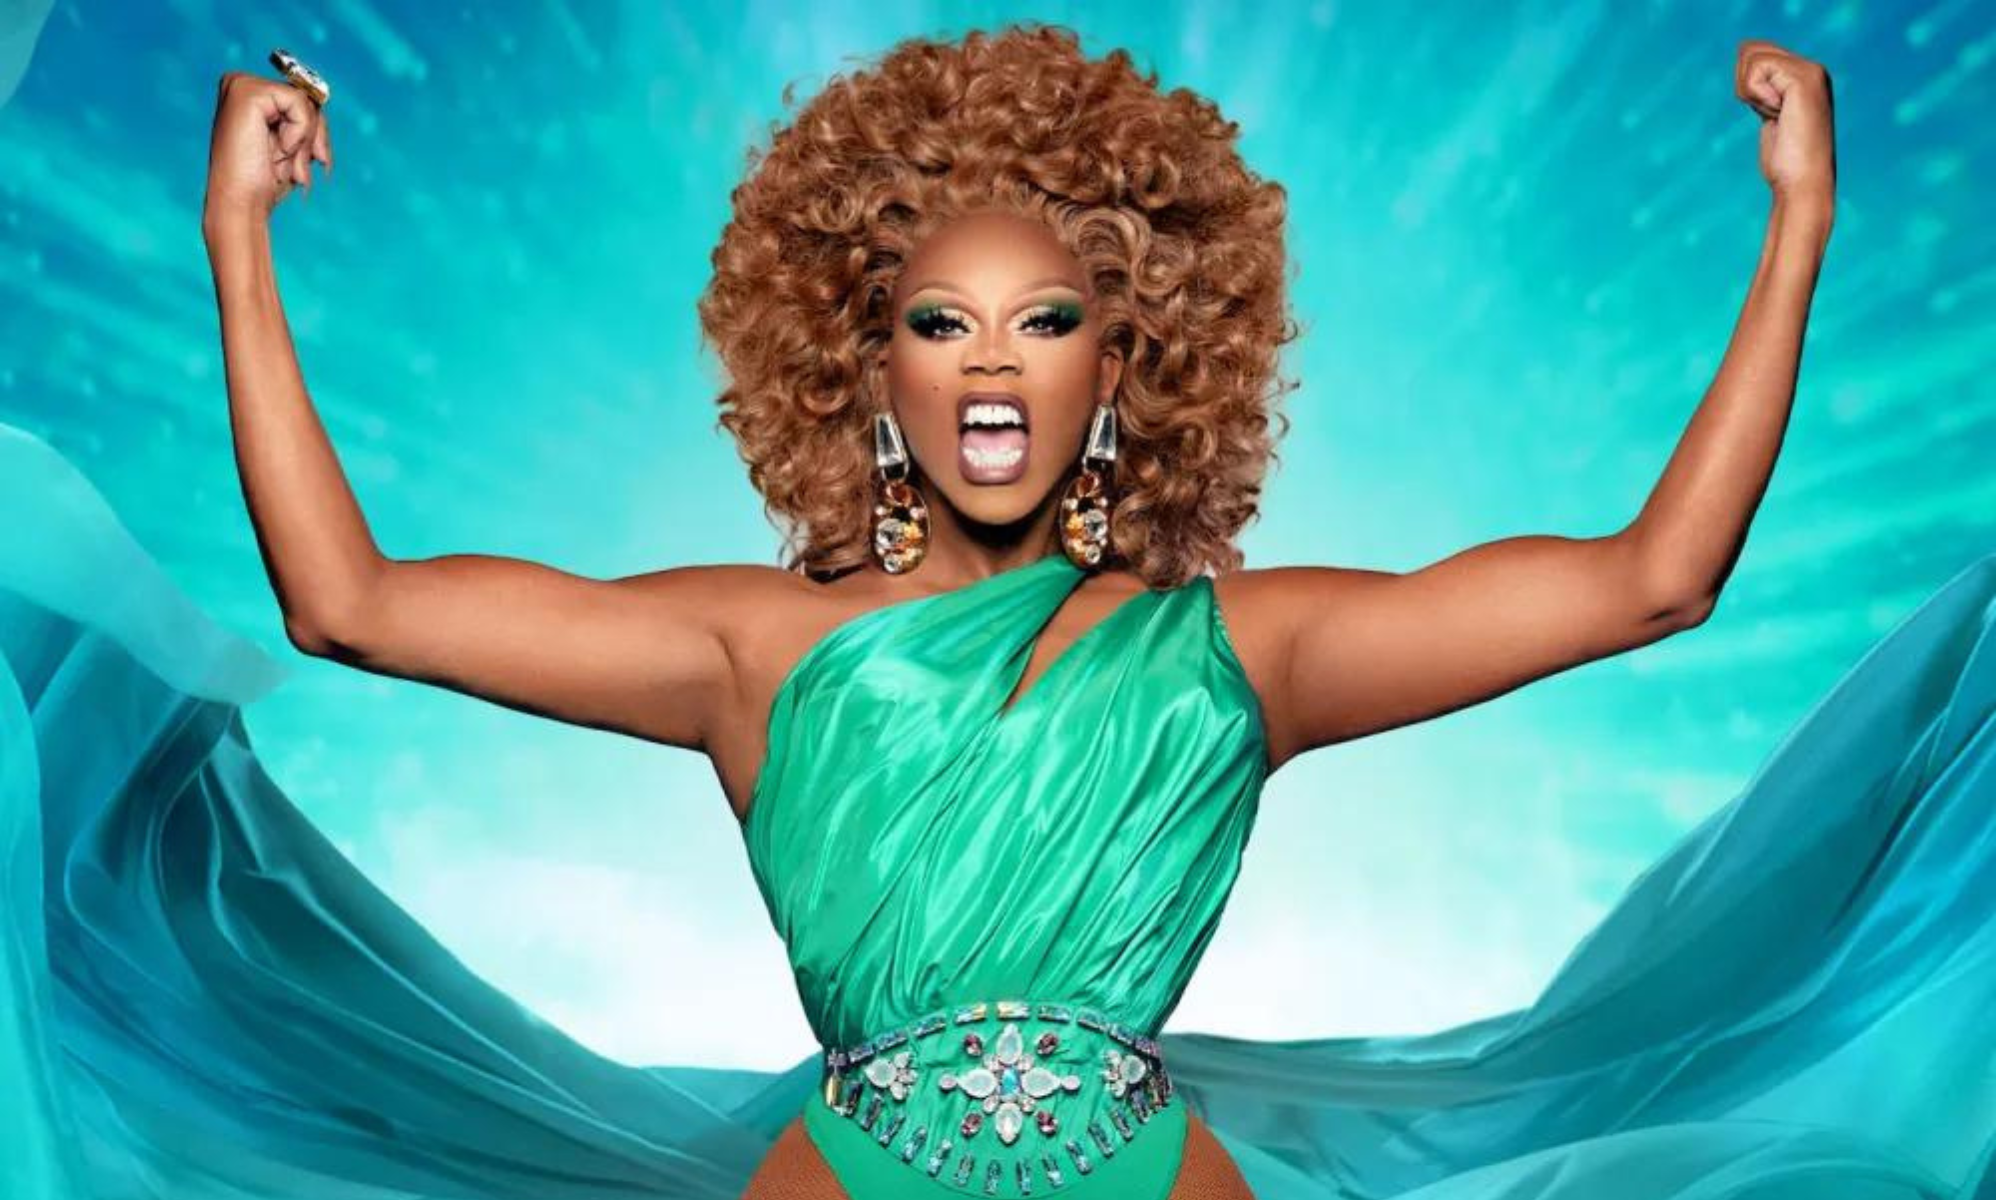 A RuPaul’s Drag Race star is appointed as head of SF’s Trans Initiatives Office